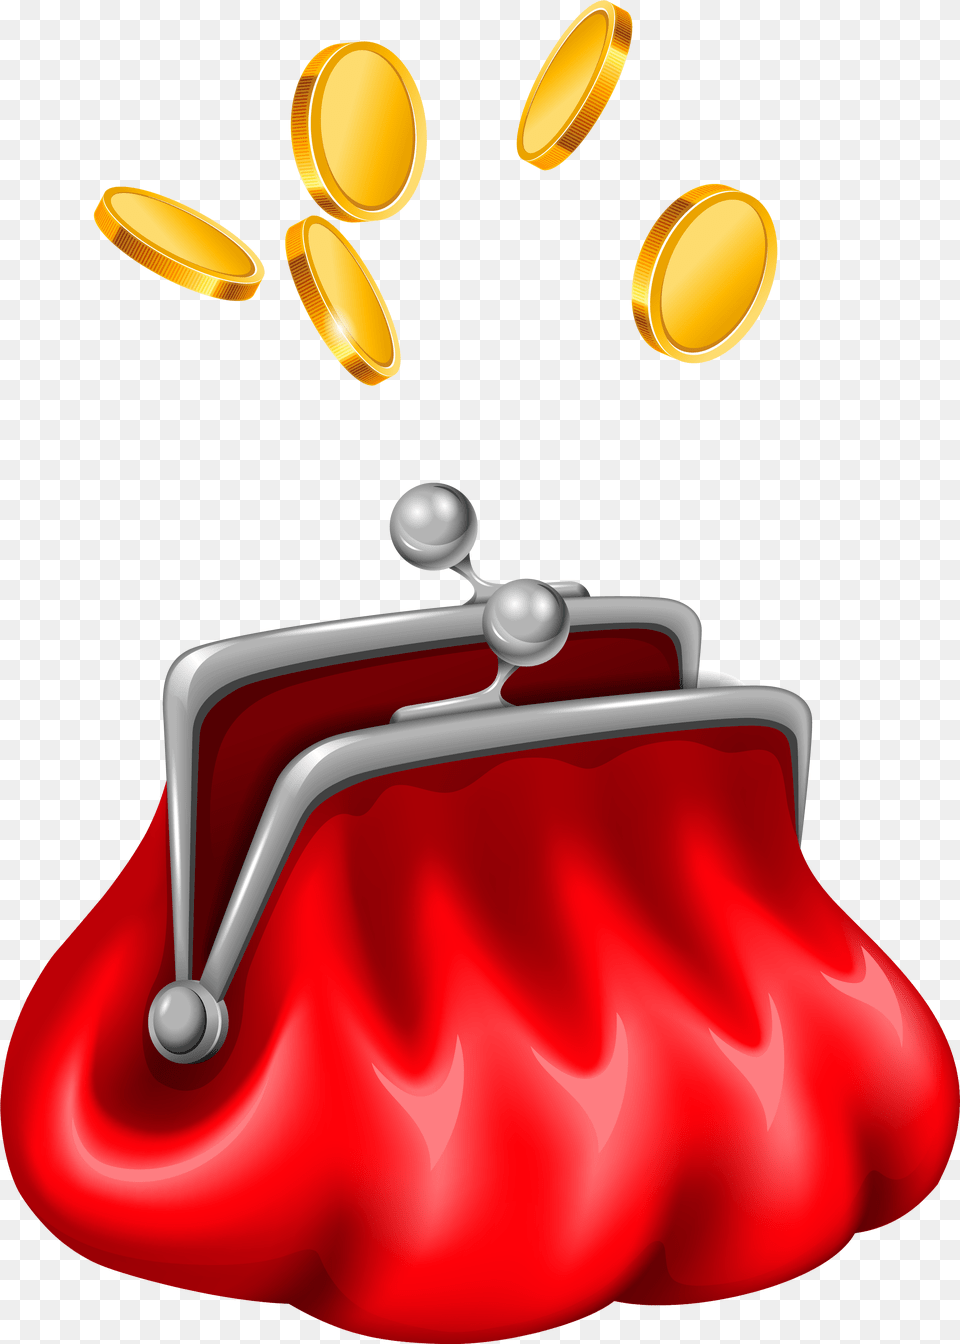 Purse With Coins Gallery Purse Clipart, Accessories, Bag, Handbag, Smoke Pipe Png Image